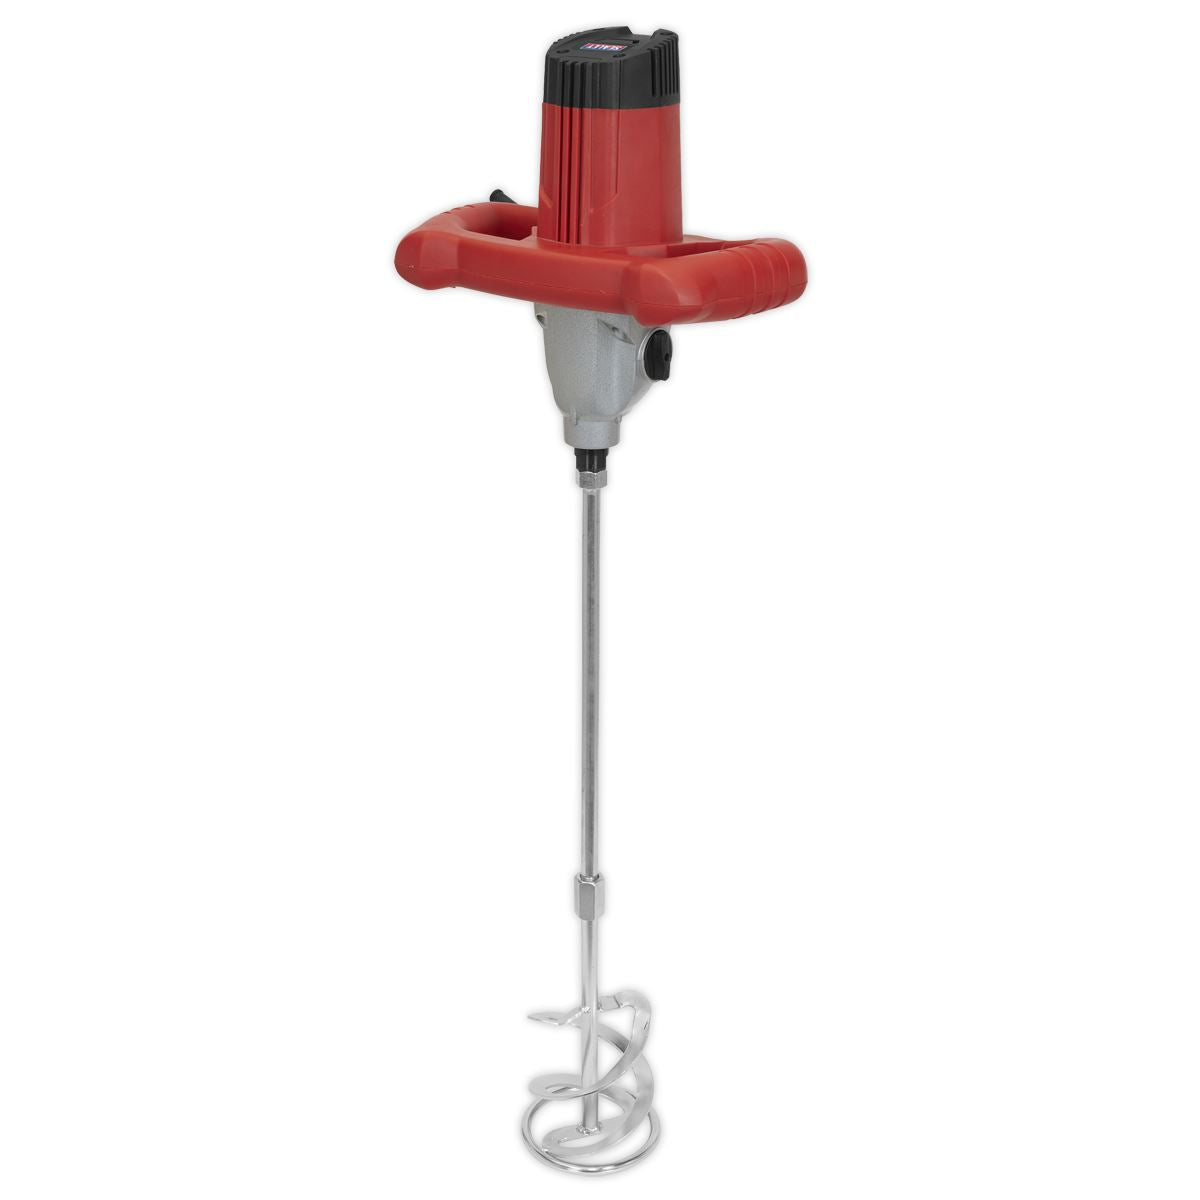 Sealey Electric Paddle Mixer 80L 1220W/230V